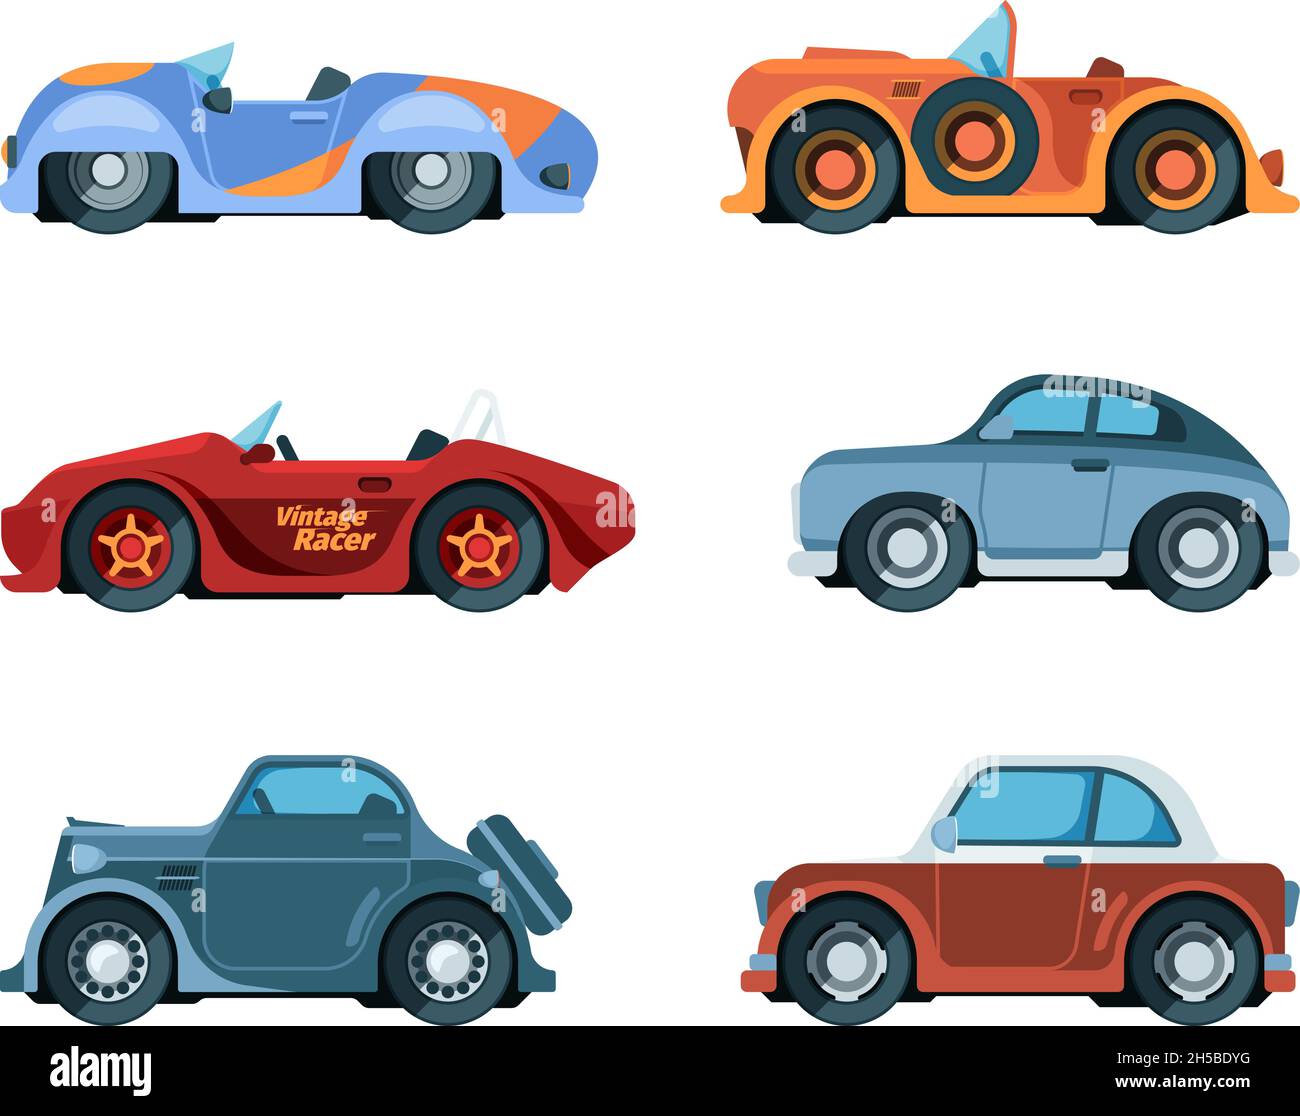 Retro cars. Old style vehicles urban transportation wheels driving car garish vector vintage collection in flat style Stock Vector